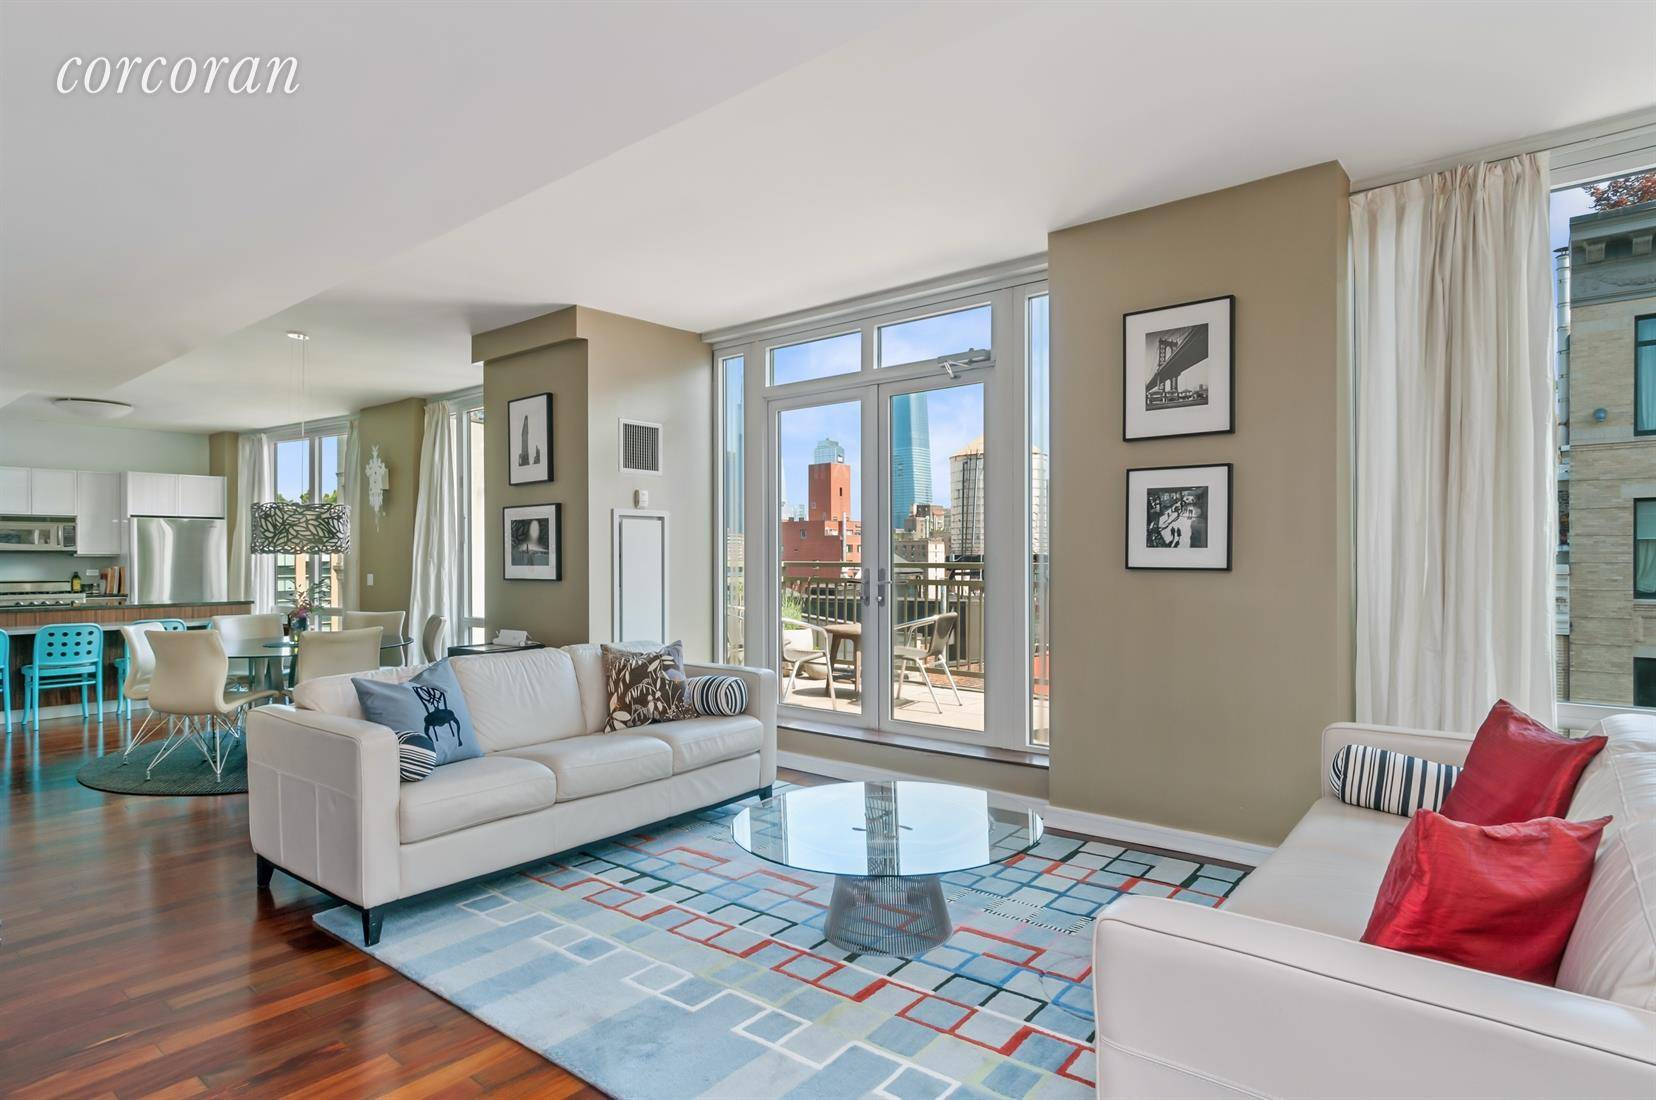 PH2B at 130 W 19th is the lowest priced on a price per square foot basis 3 bedroom home with private outdoor space and spectacular views in a doorman CONDO ...